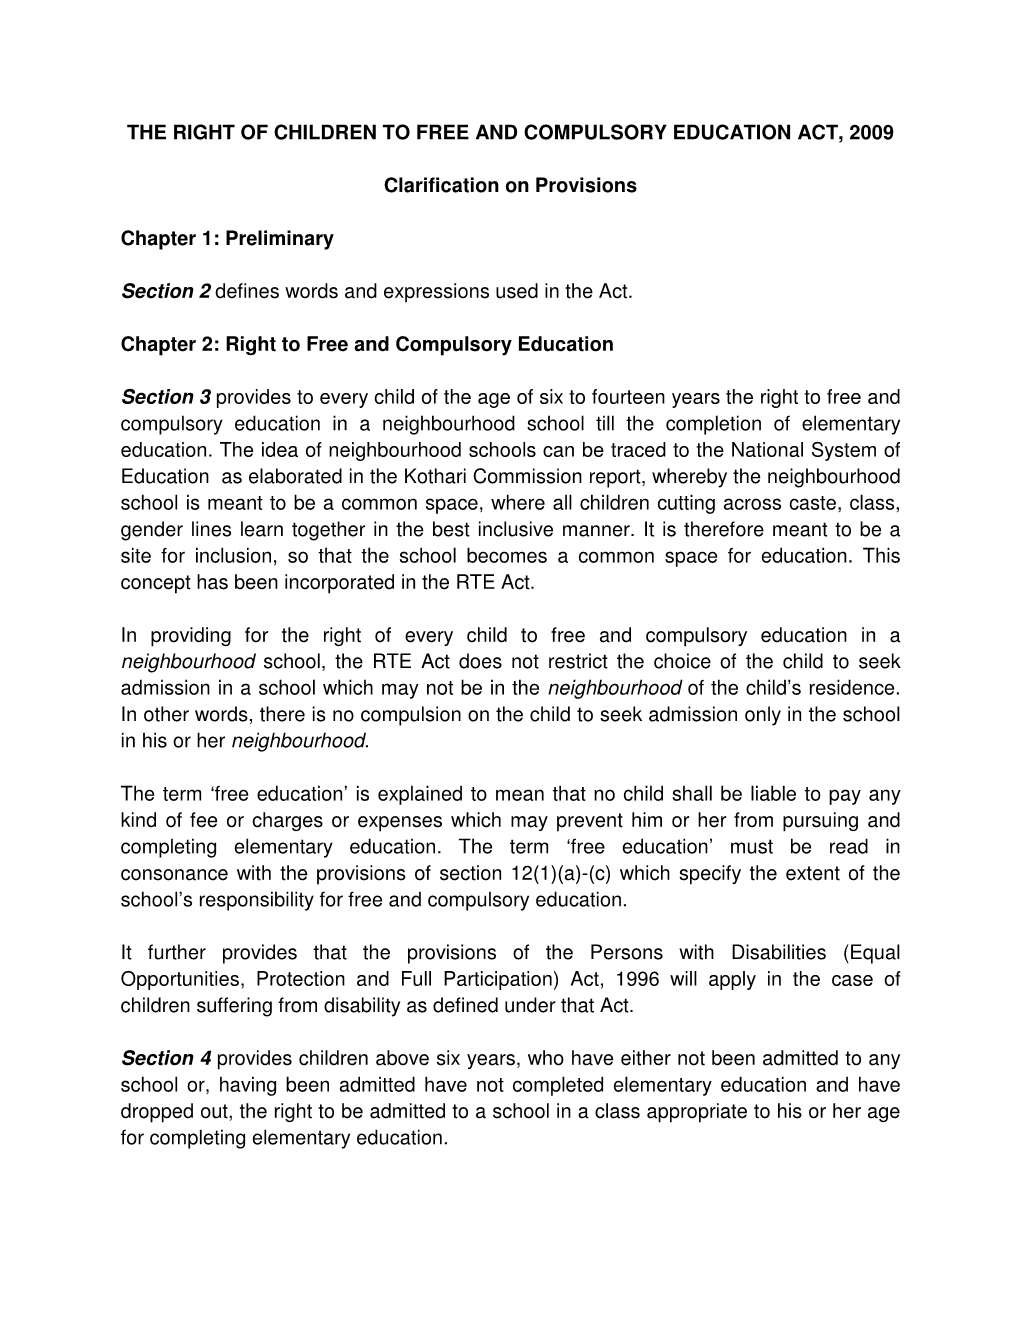 Right of Children to Free and Compulsory Education Act of 2009